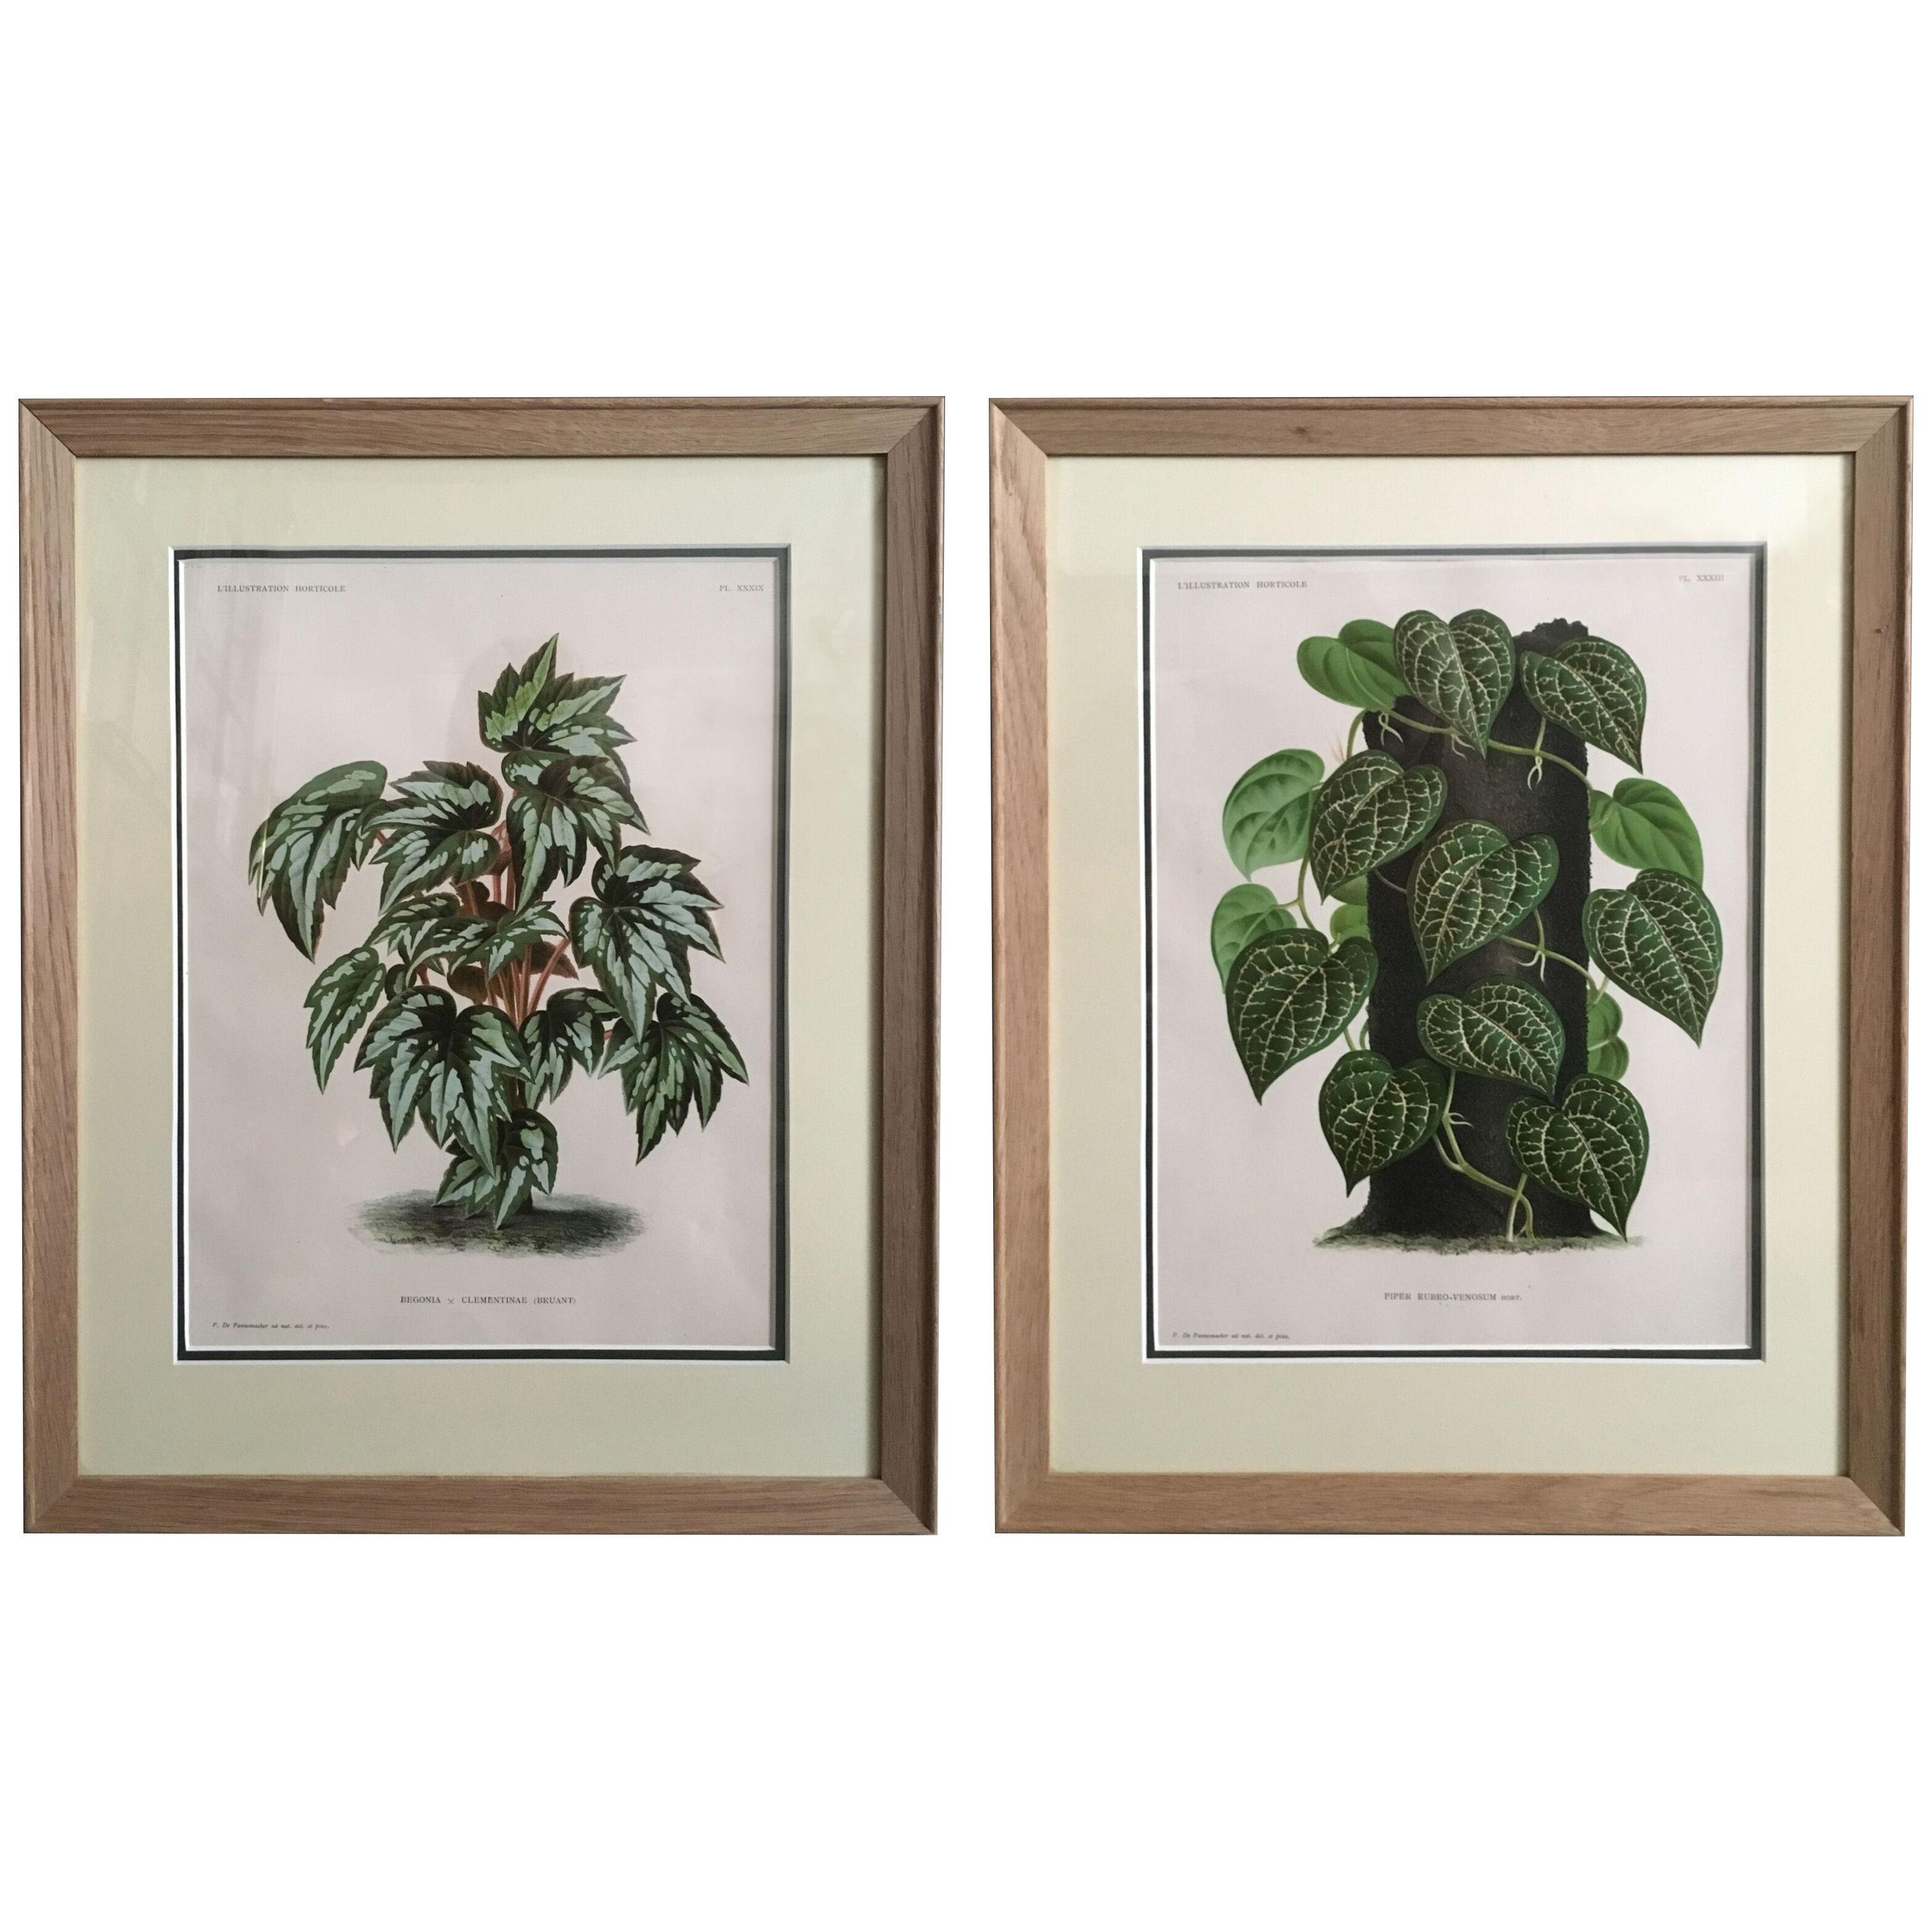 A pair of foliage botanical engravings from L’illustration Horticole